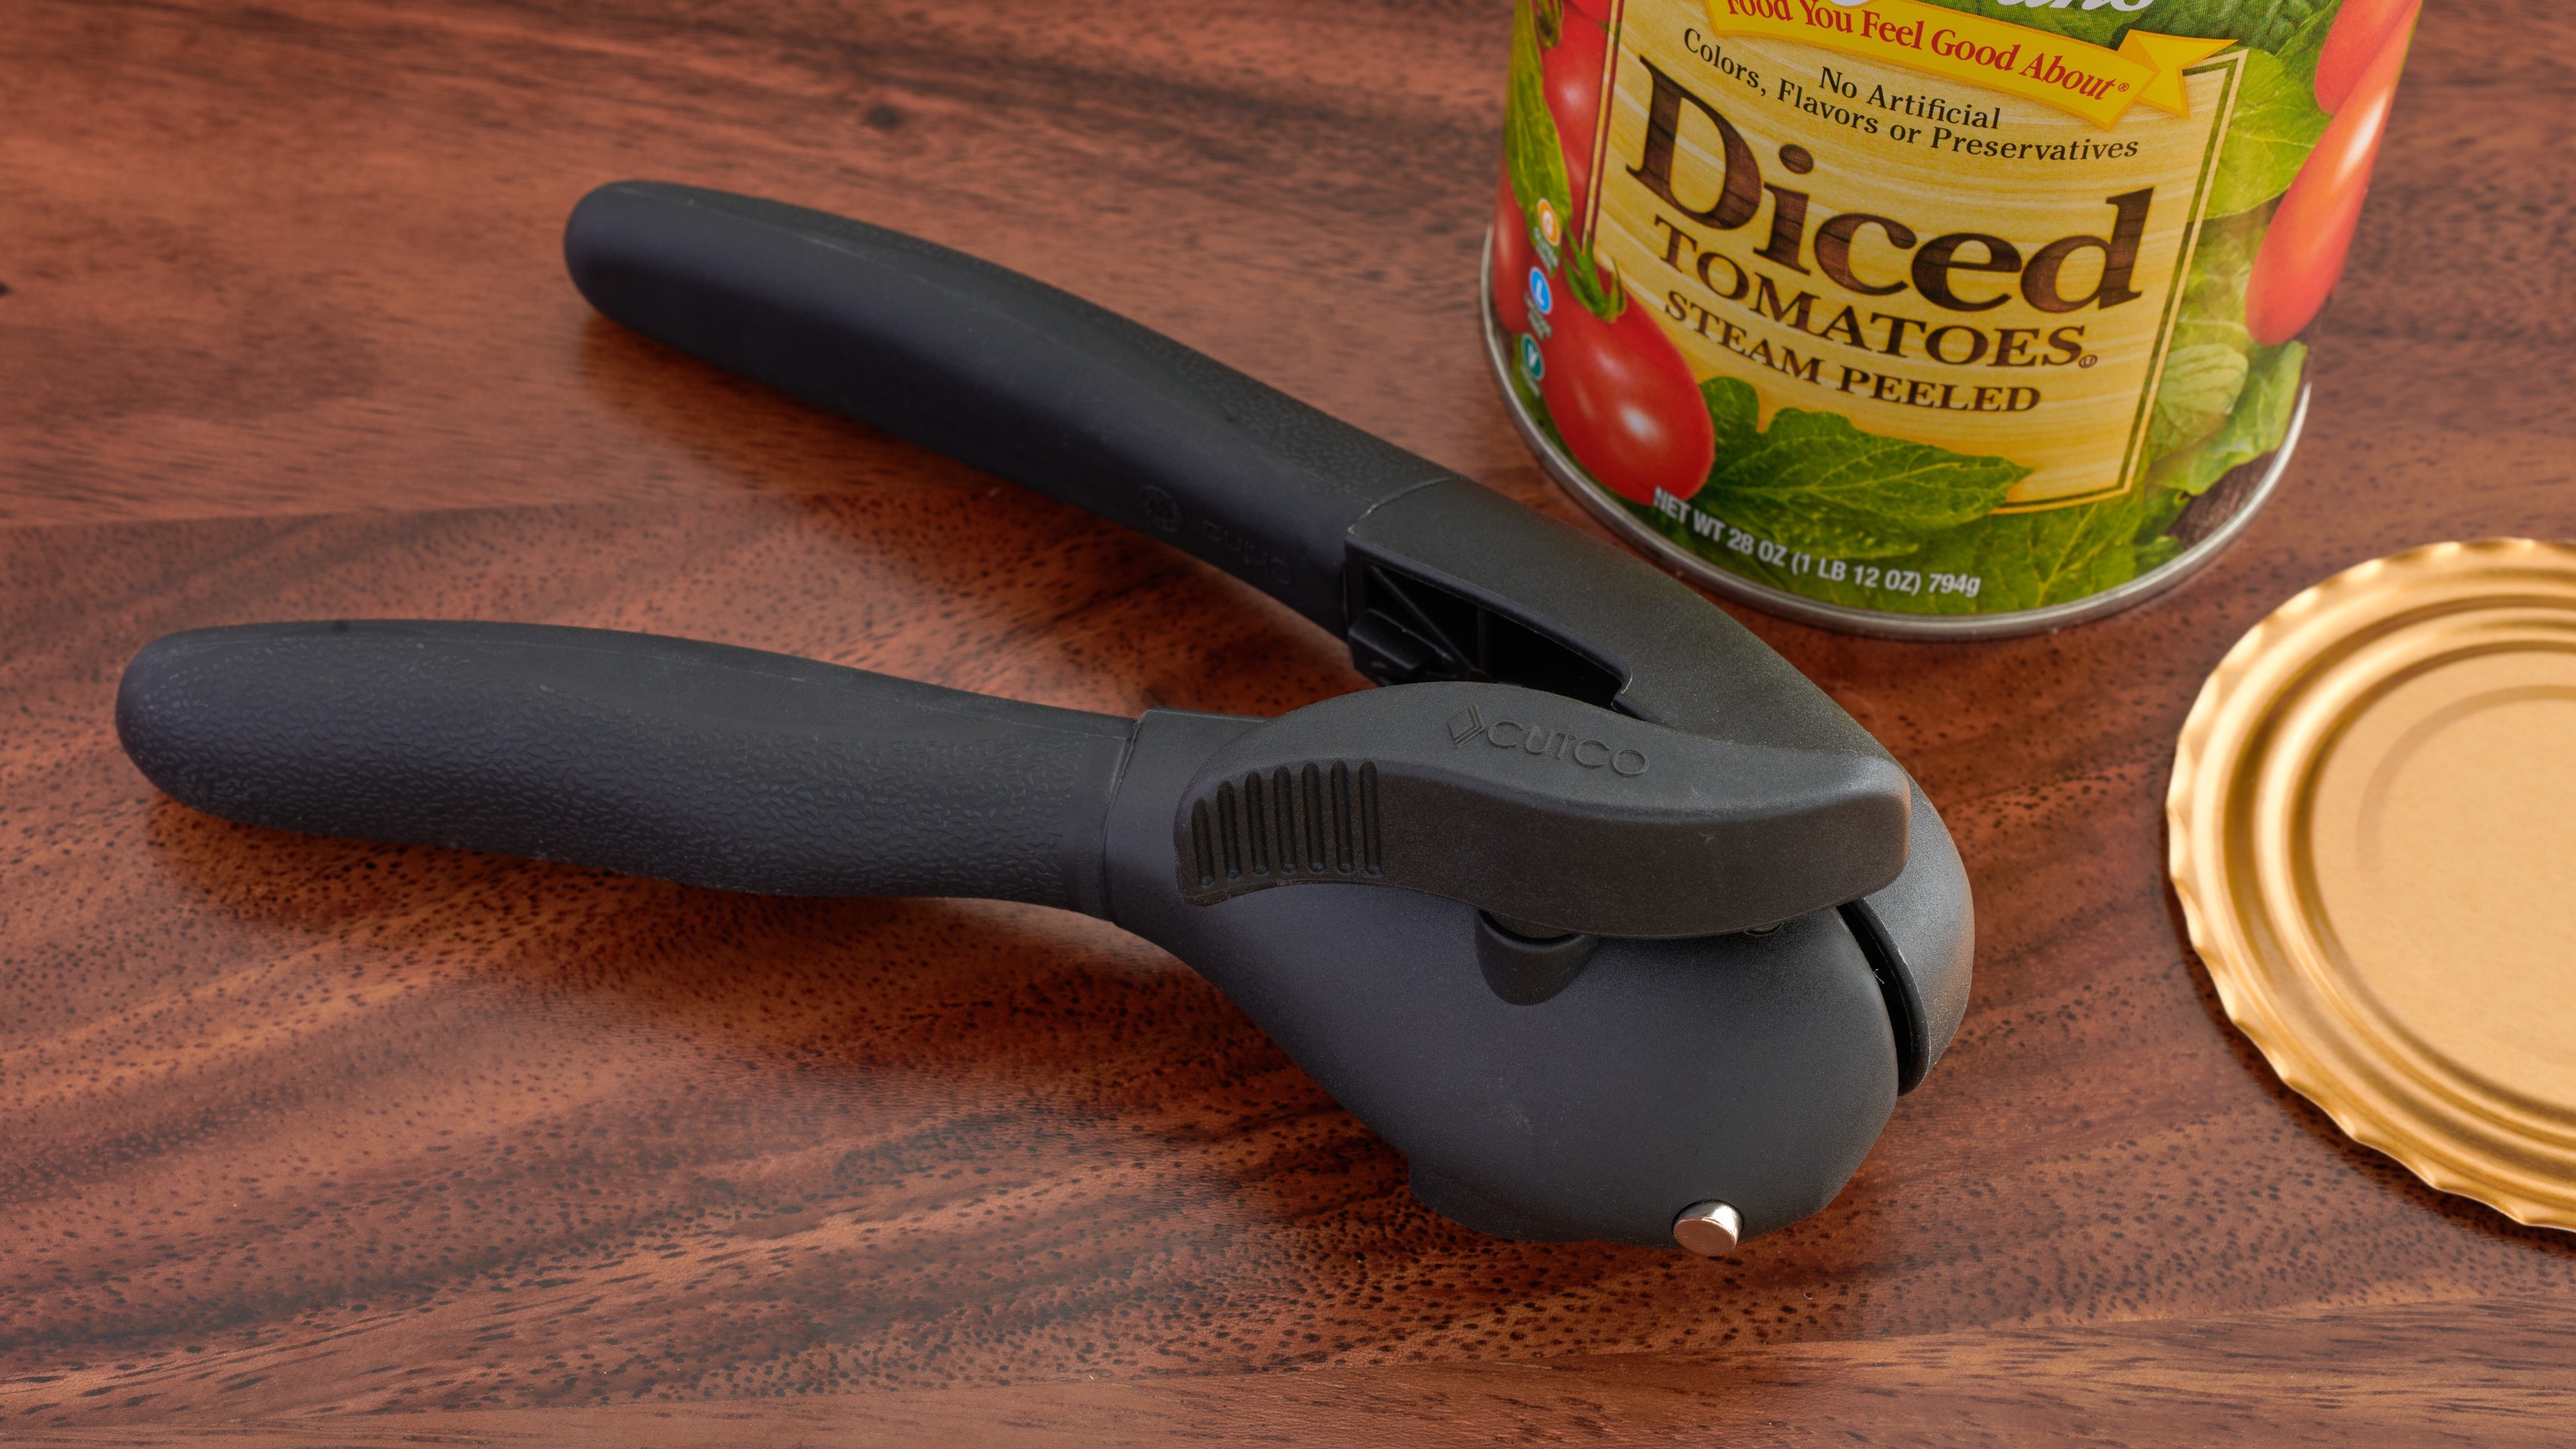 10 Best Can Openers for Arthritis That Alleviate Pain in the Kitchen